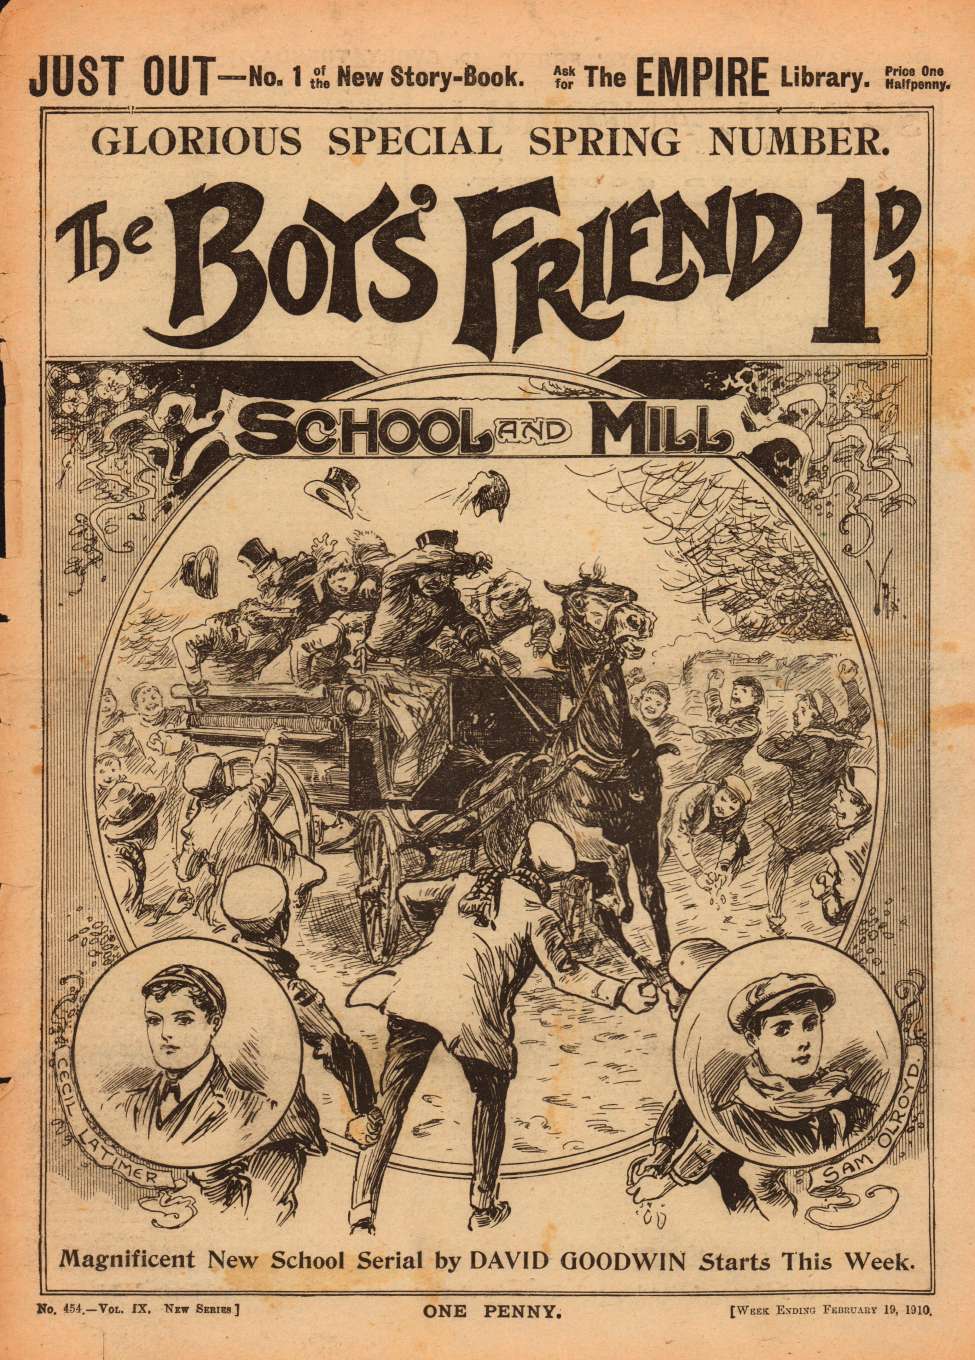 The Boys' Friend 454 - School and Mill